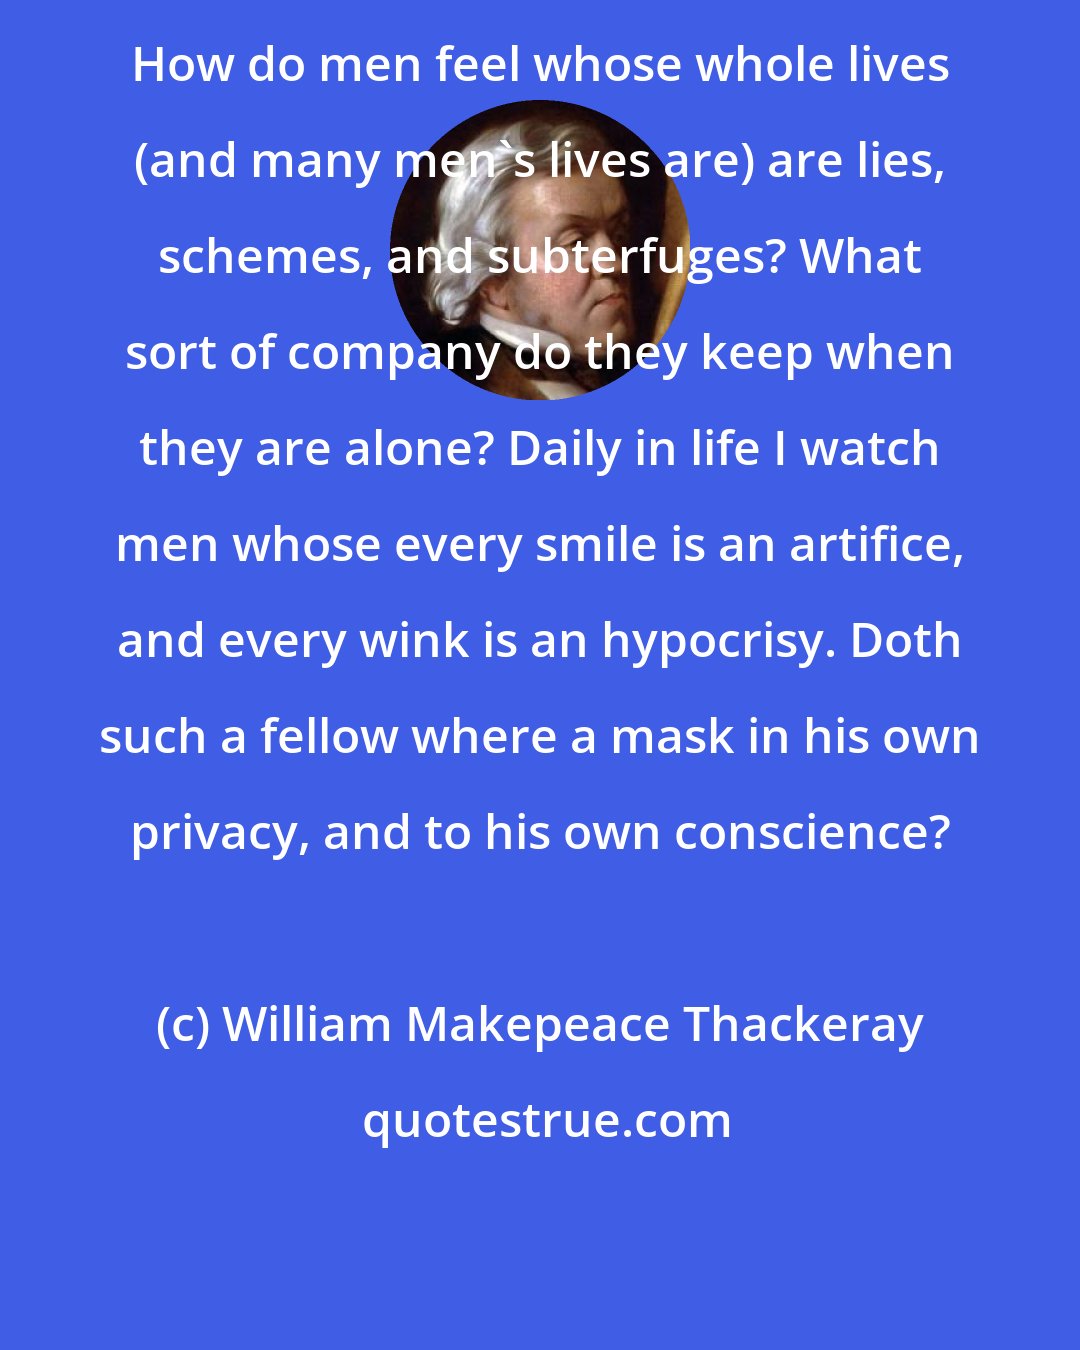 William Makepeace Thackeray: How do men feel whose whole lives (and many men's lives are) are lies, schemes, and subterfuges? What sort of company do they keep when they are alone? Daily in life I watch men whose every smile is an artifice, and every wink is an hypocrisy. Doth such a fellow where a mask in his own privacy, and to his own conscience?